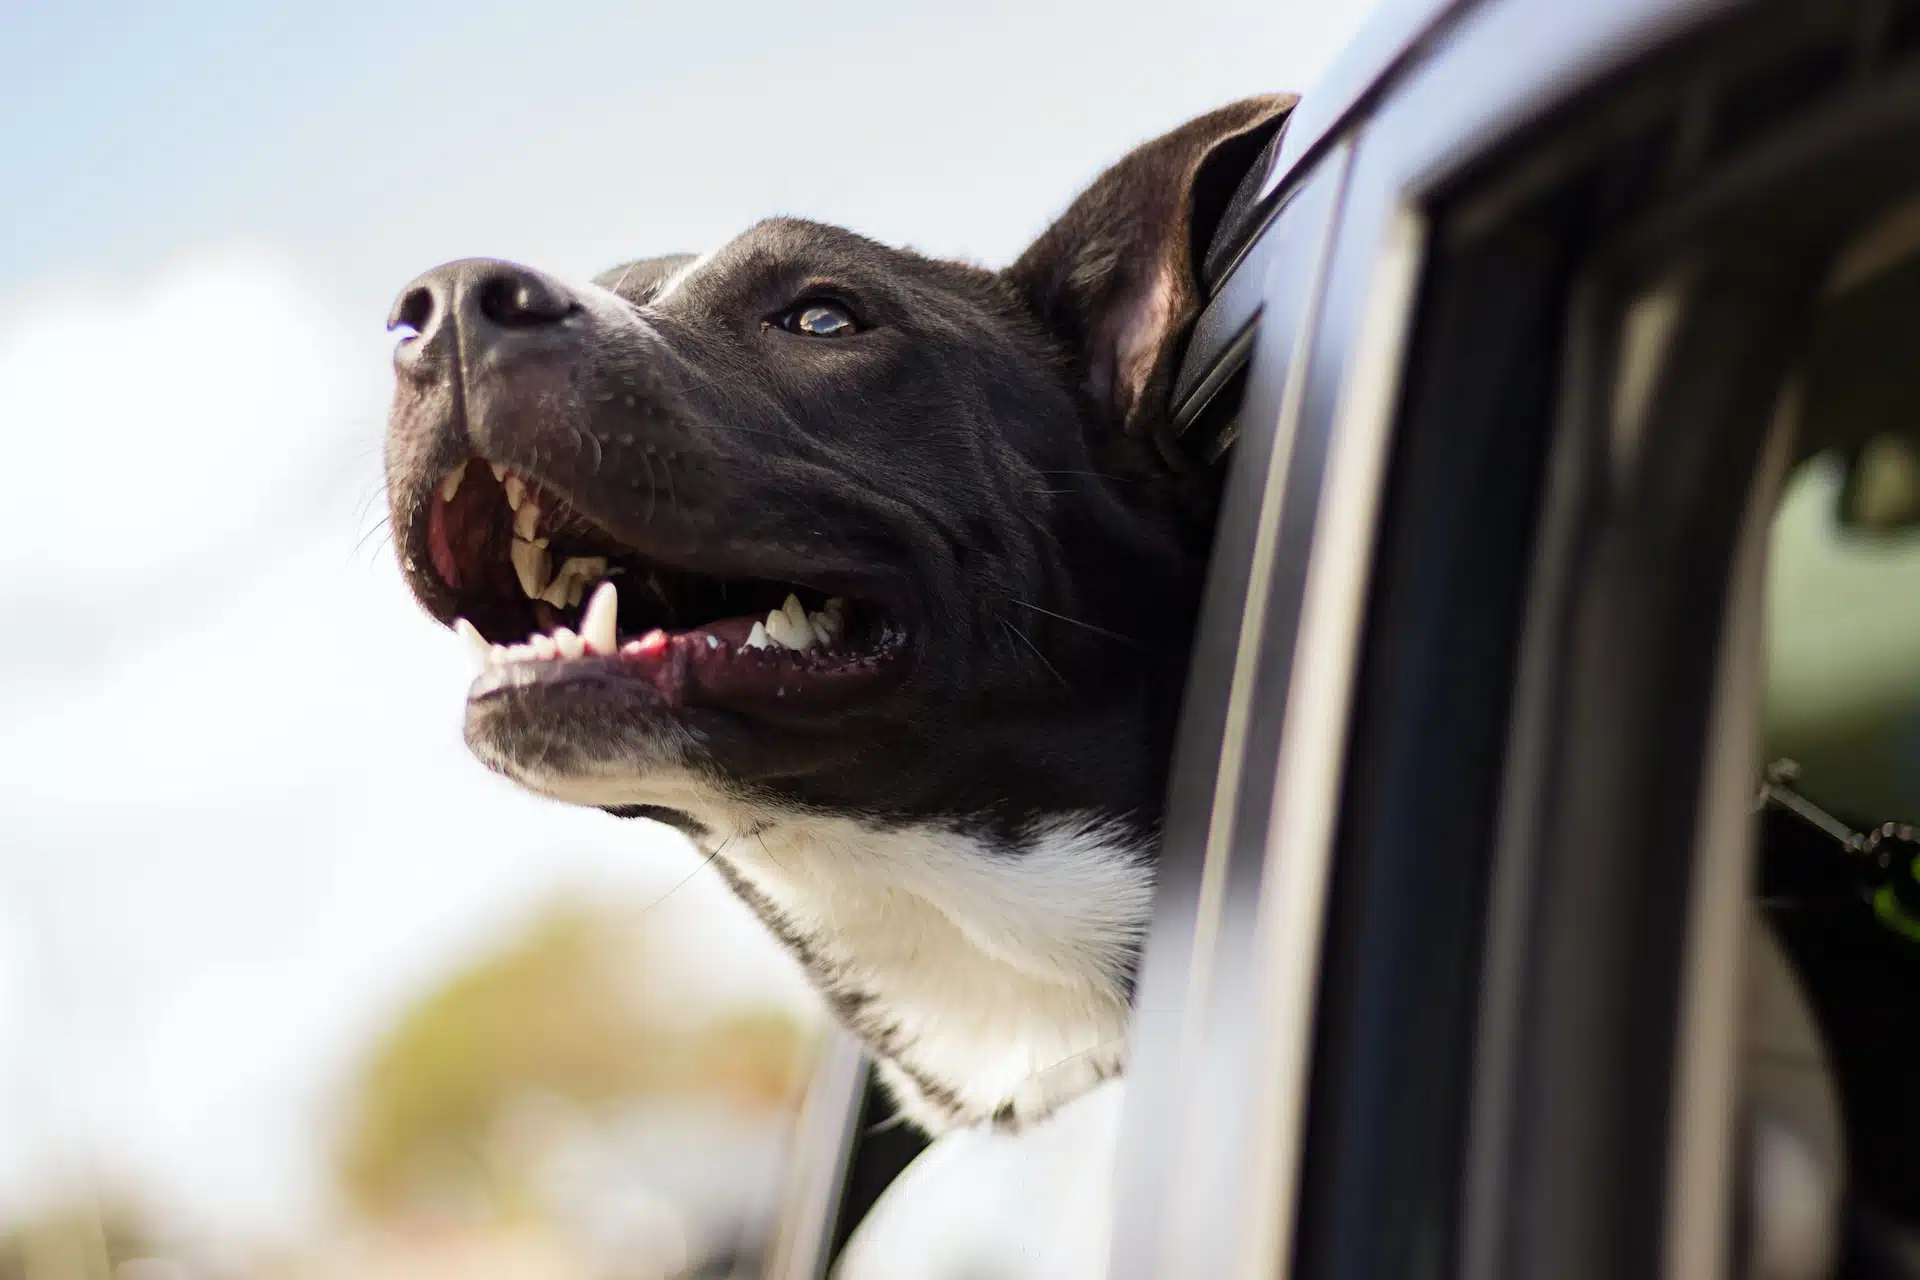 Make travelling with your pet, like this happy black dog, fun and fuss-free.